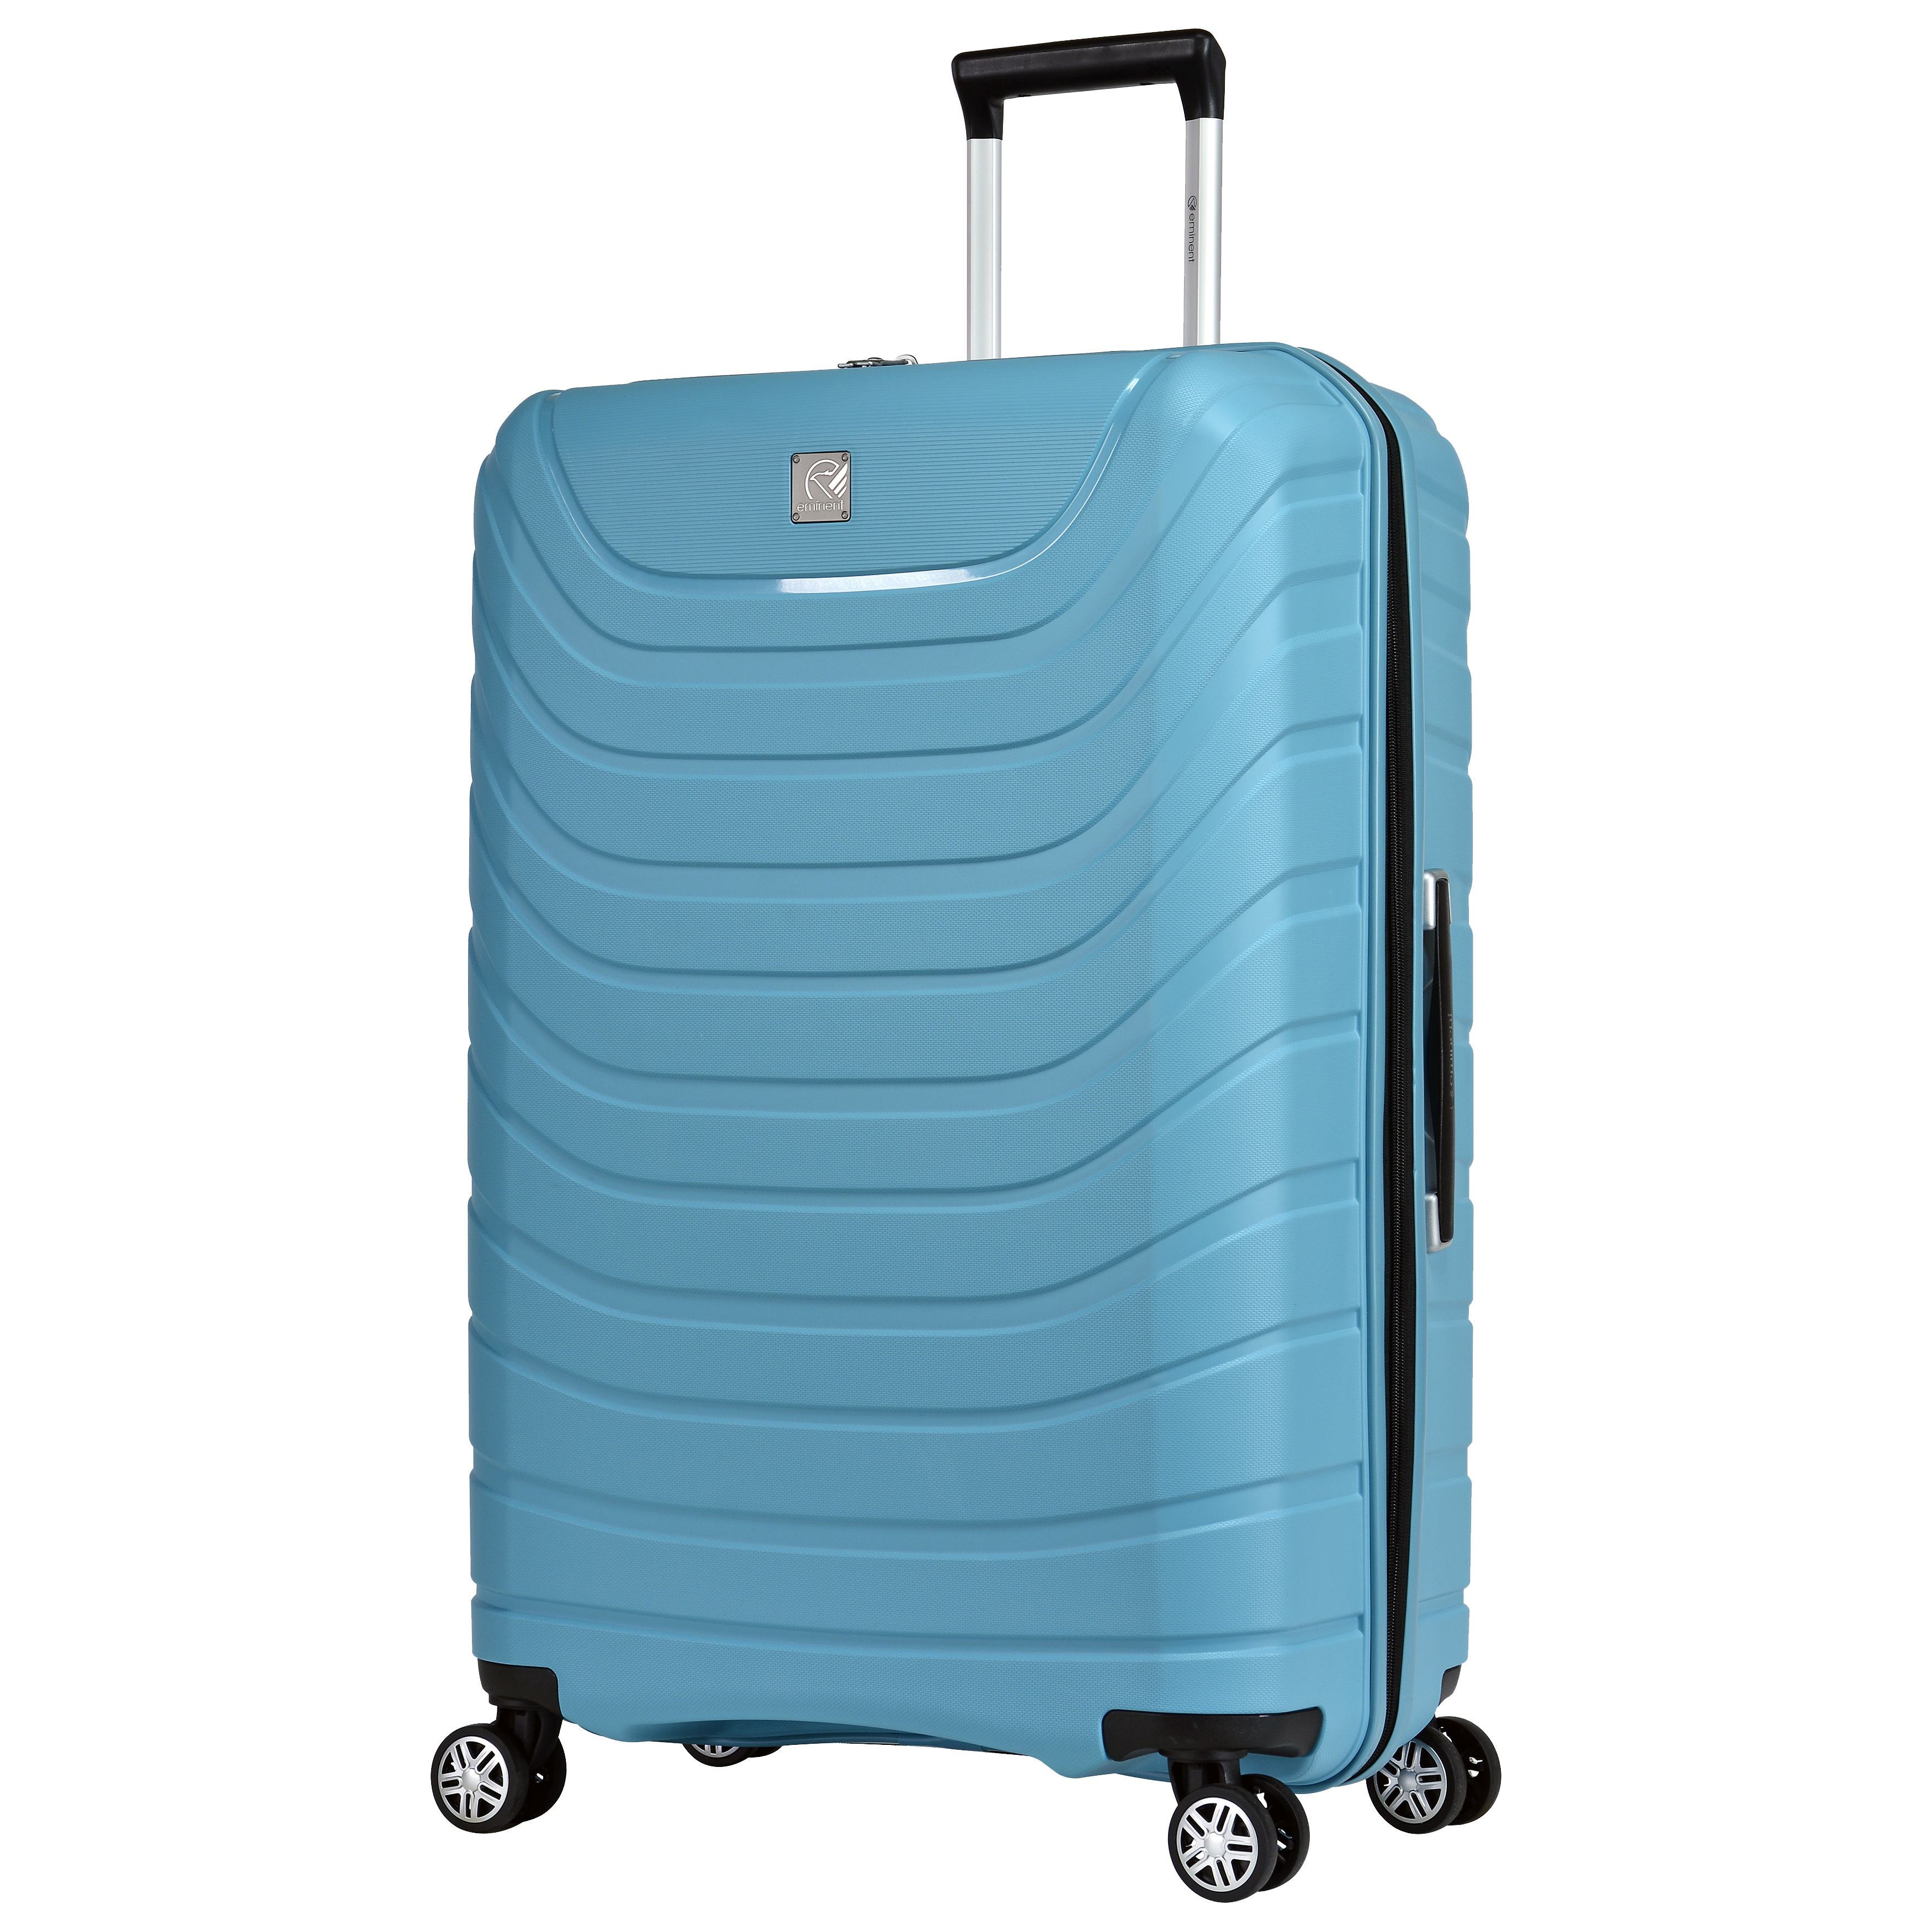 Buy Blue Luggage & Trolley Bags for Men by It Luggage Online